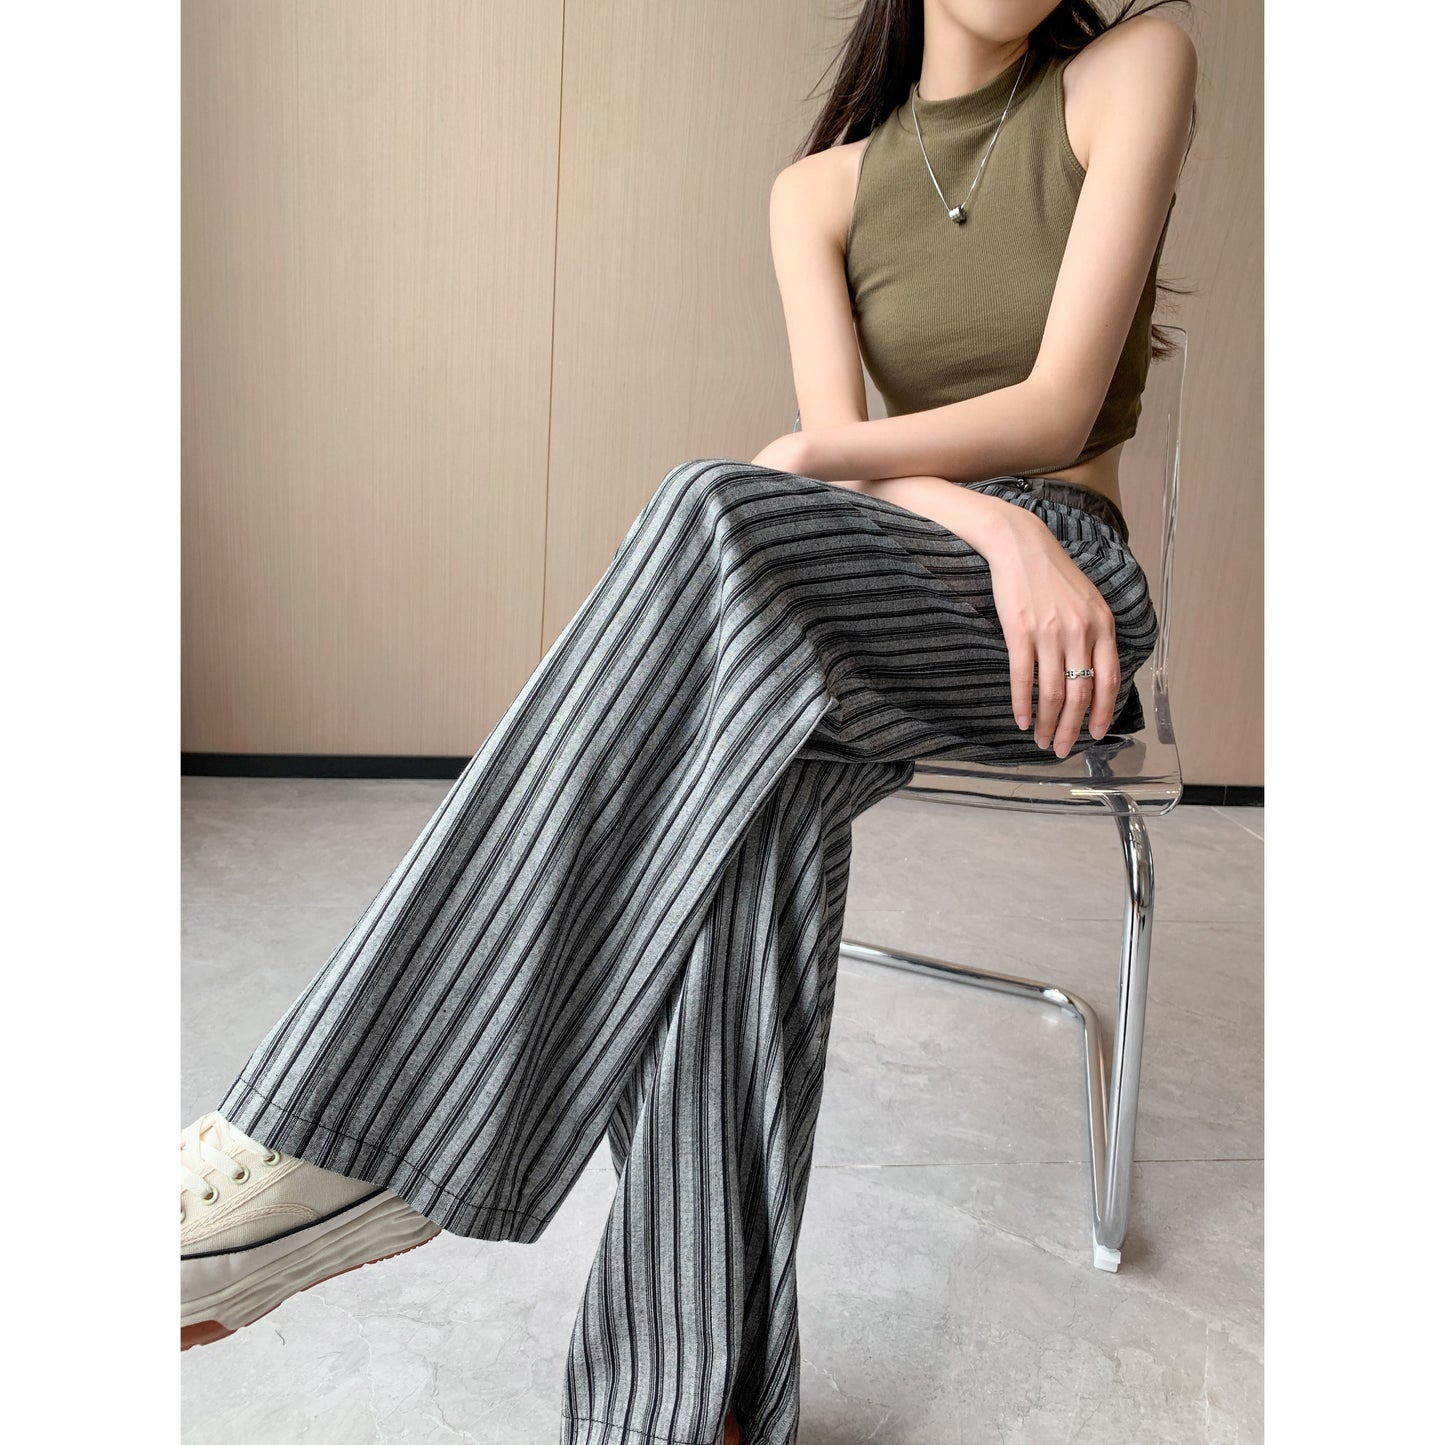 Loose Fit High-Waisted Lazy Thin Straight Stripe Drawstring Pants